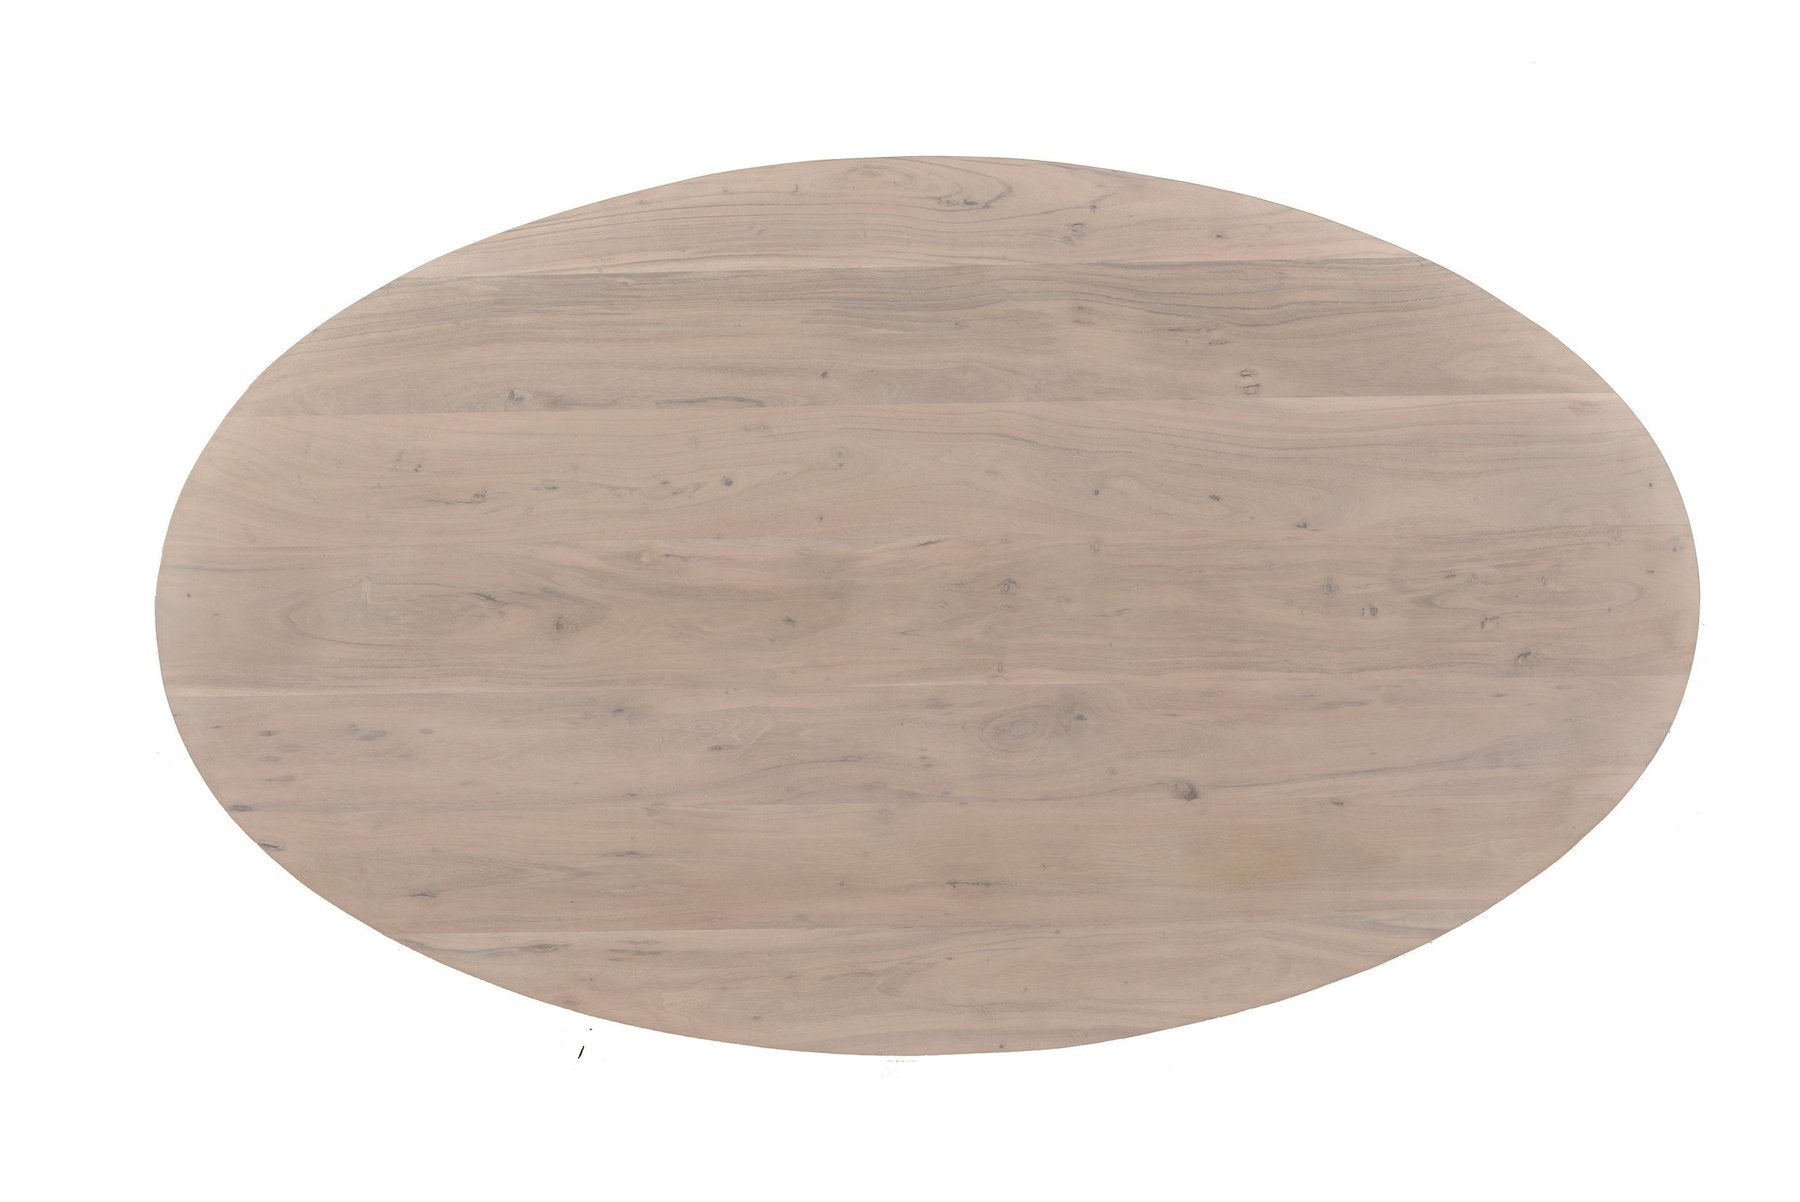 Aspen Oval Dining Table - With Metal Base